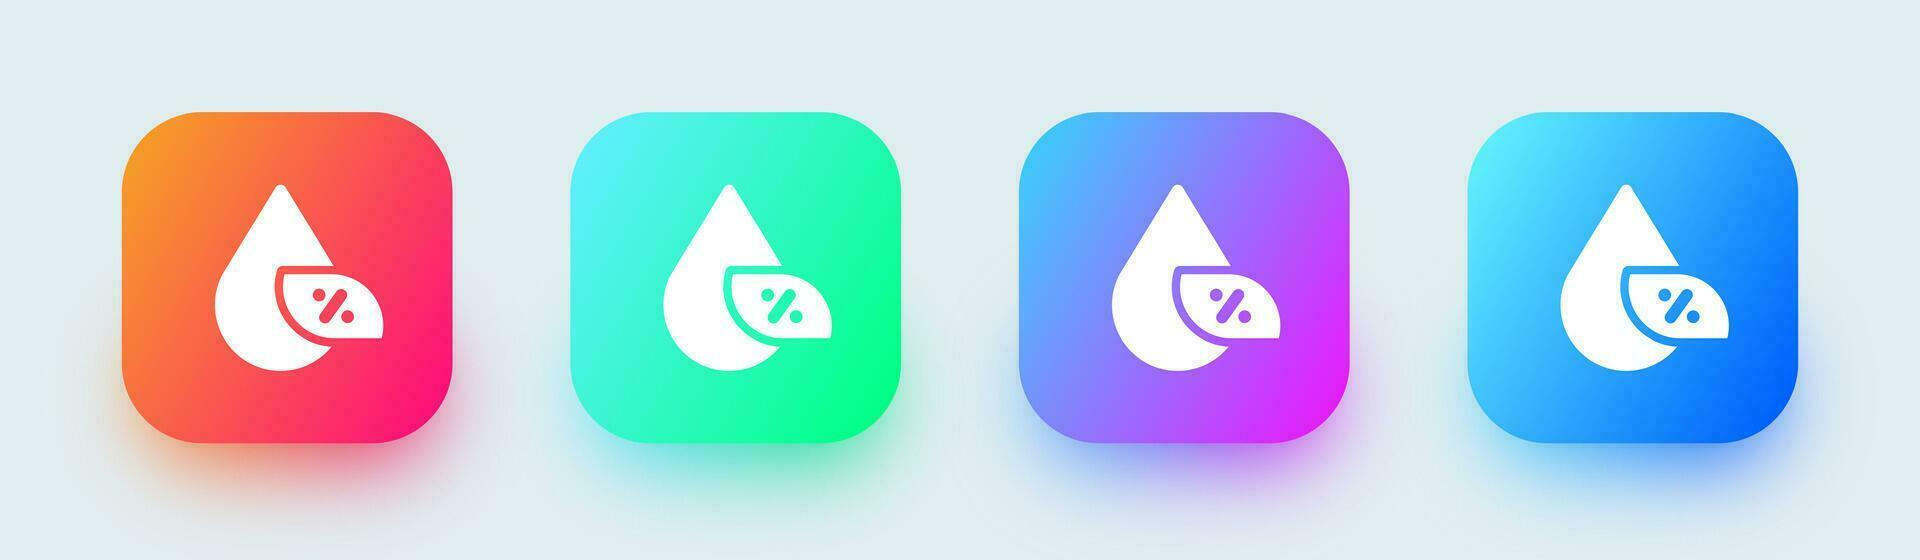 Humidity solid icon in square gradient colors. Water signs vector illustration.